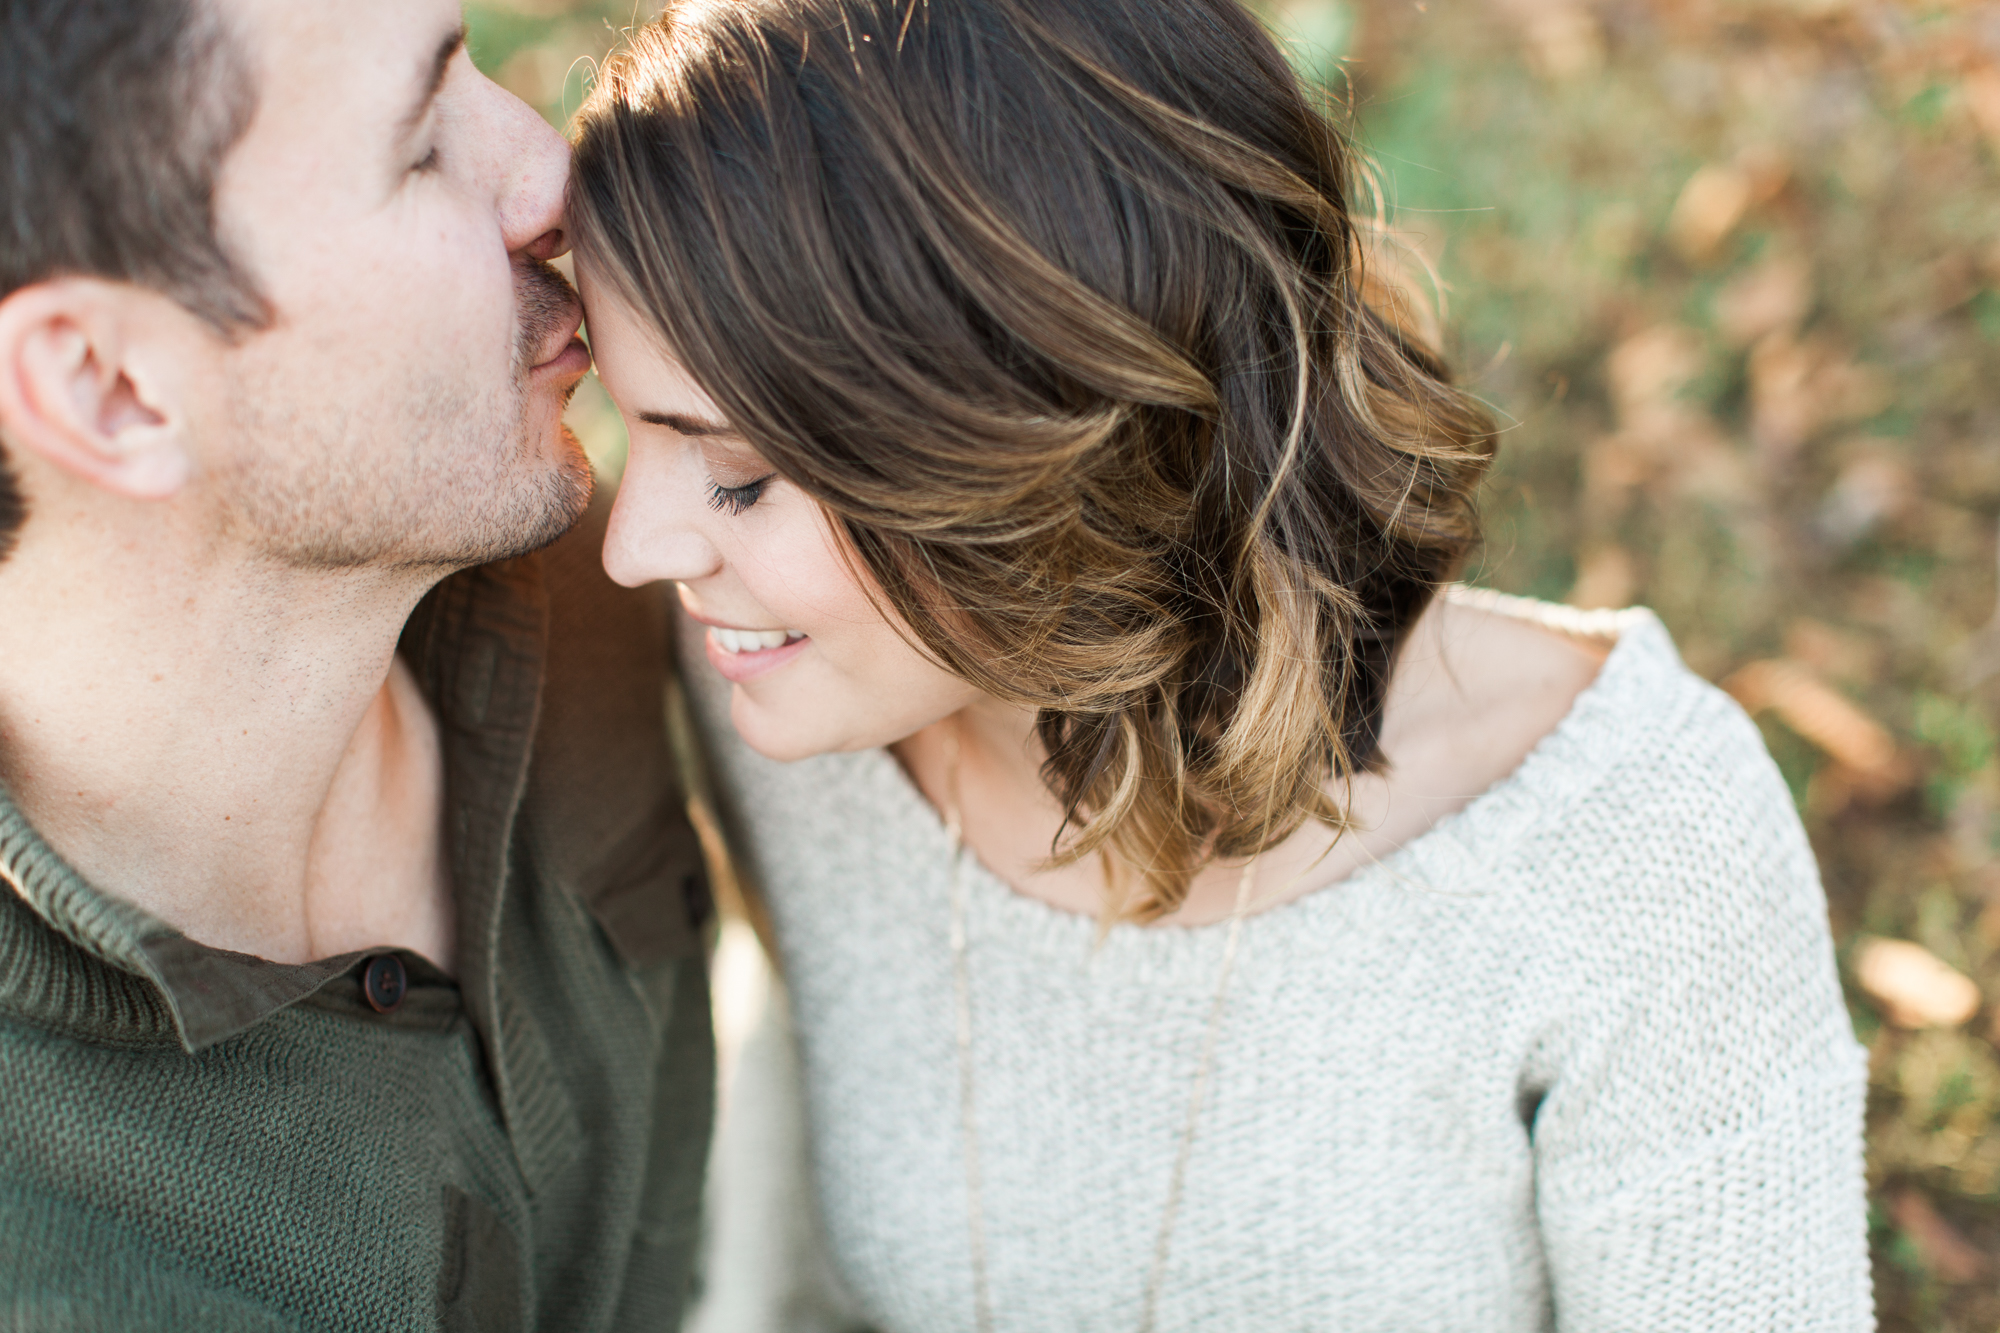 Sweet kisses during engagement session always make the sweetest photos.